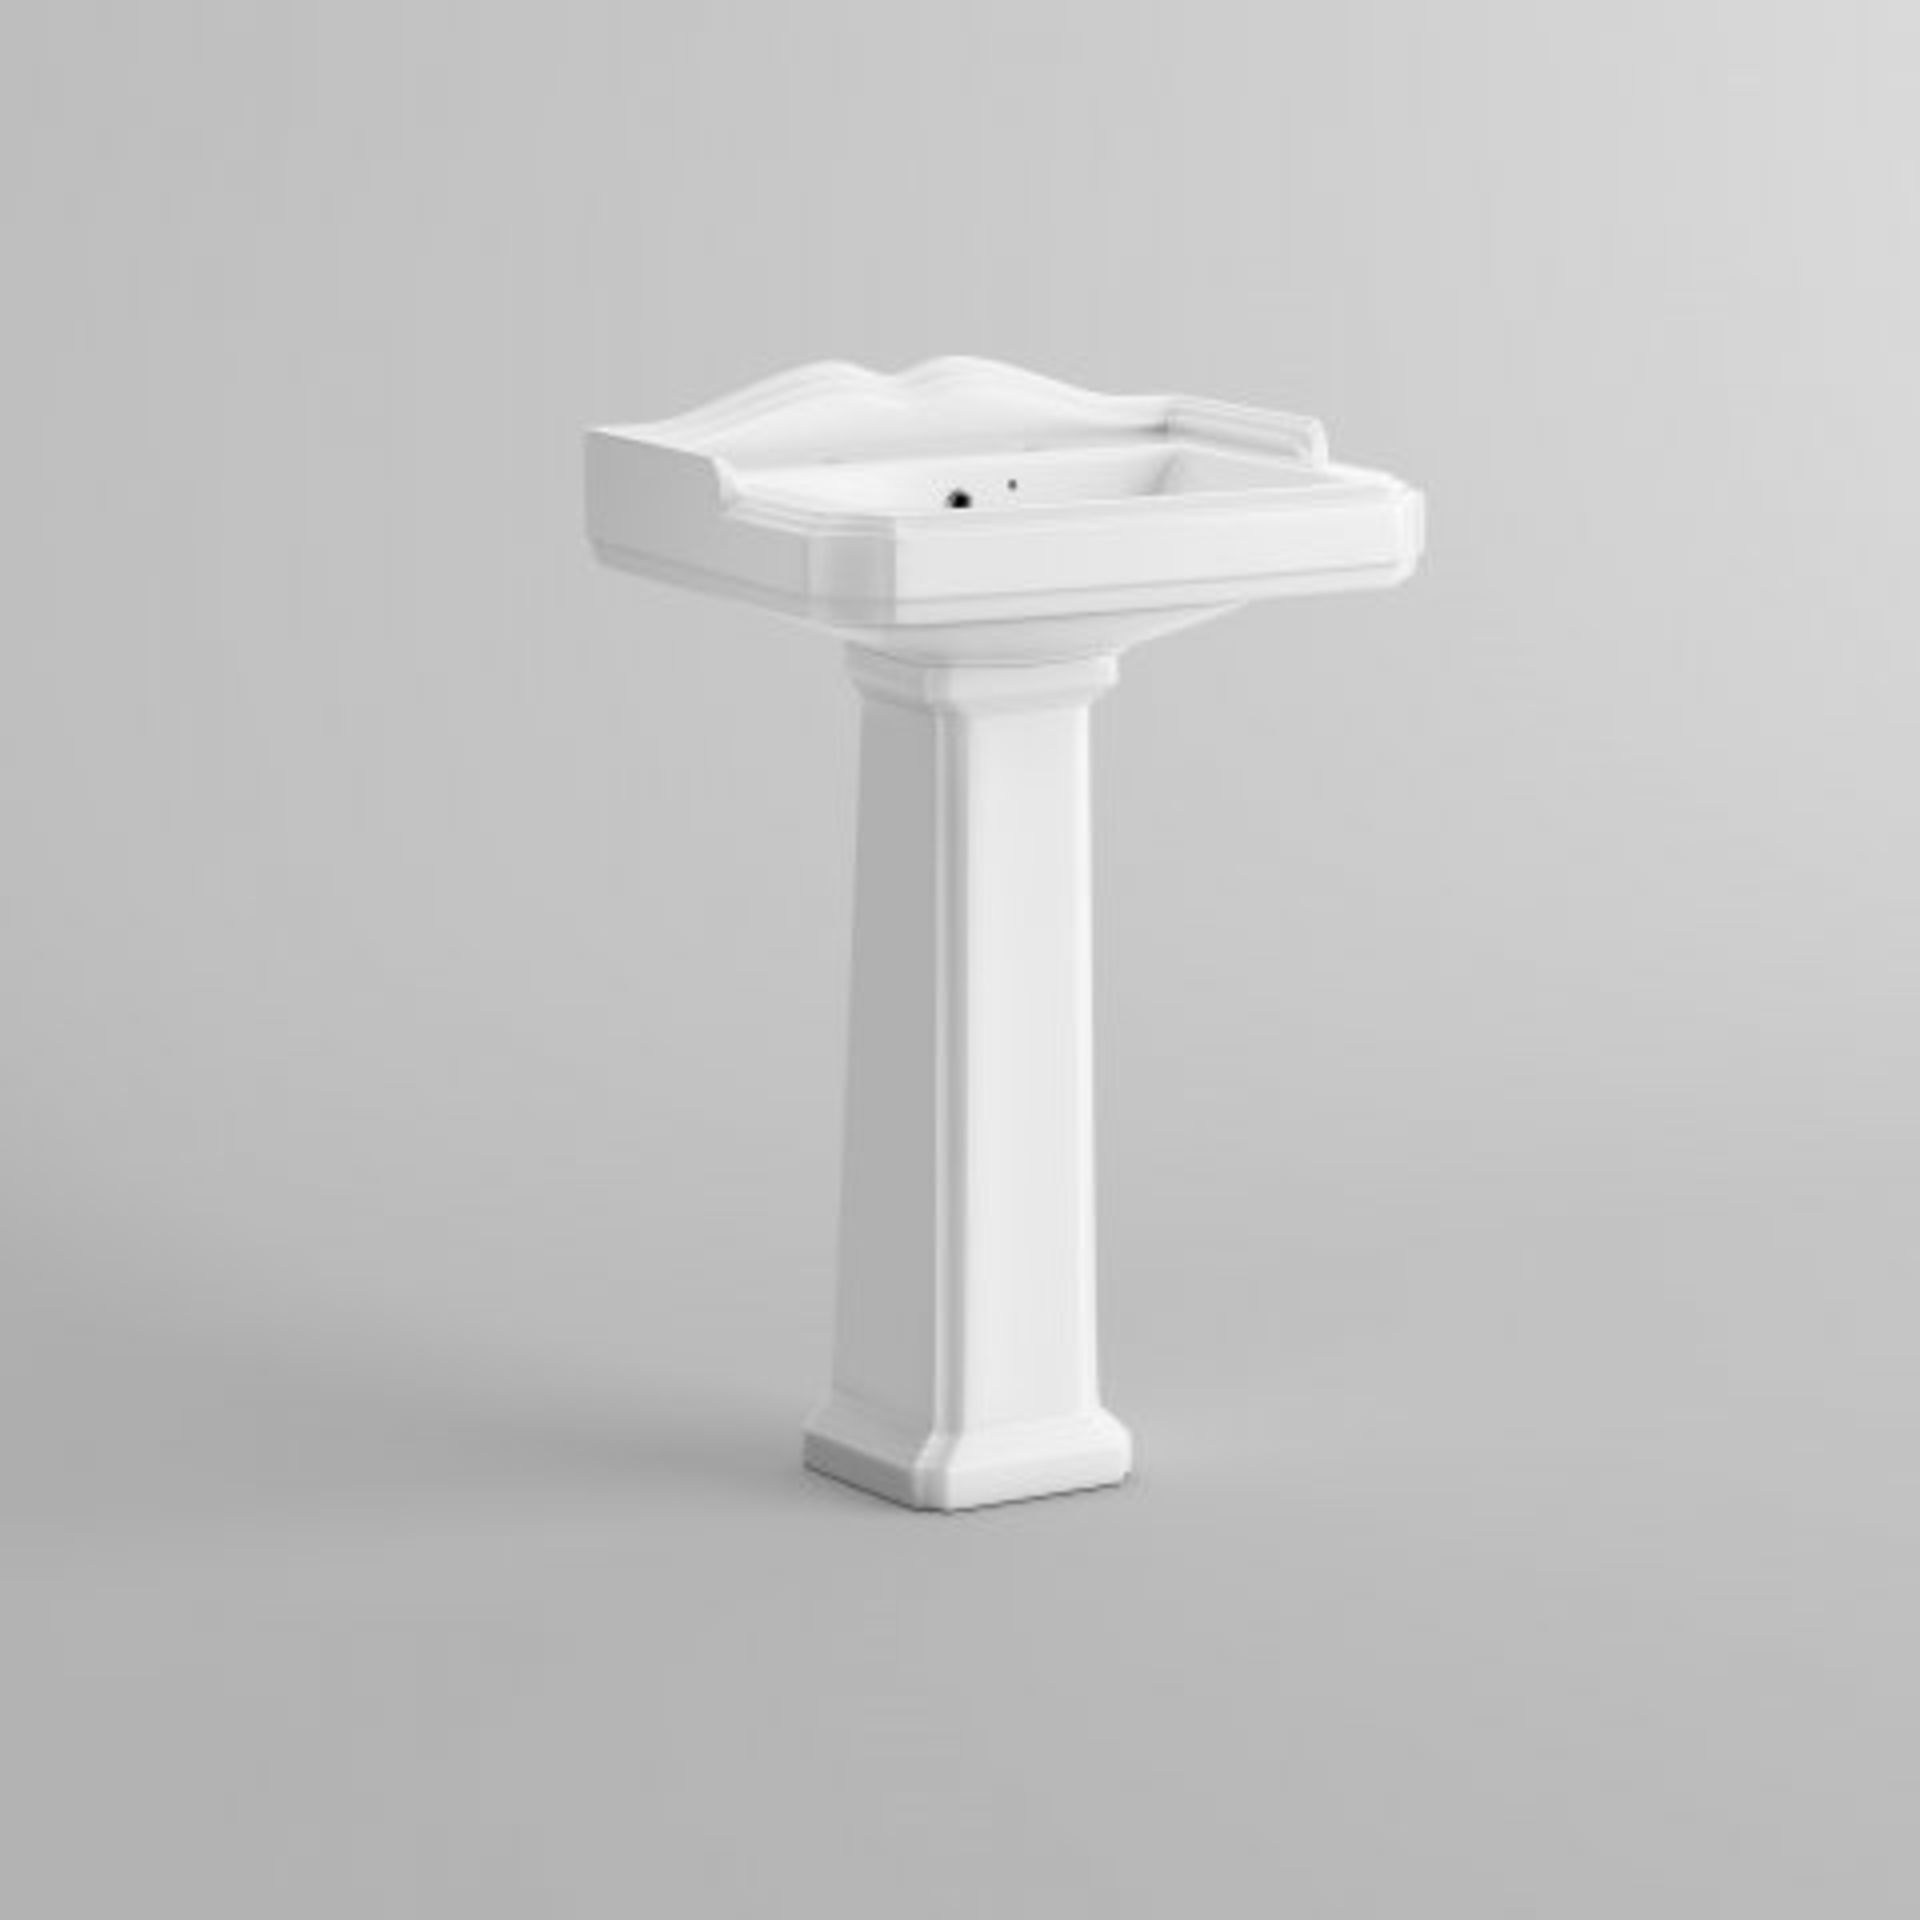 (AA217) Victoria Basin & Pedestal - Double Tap Hole. RRP £175.99. This traditional basin, - Image 4 of 4